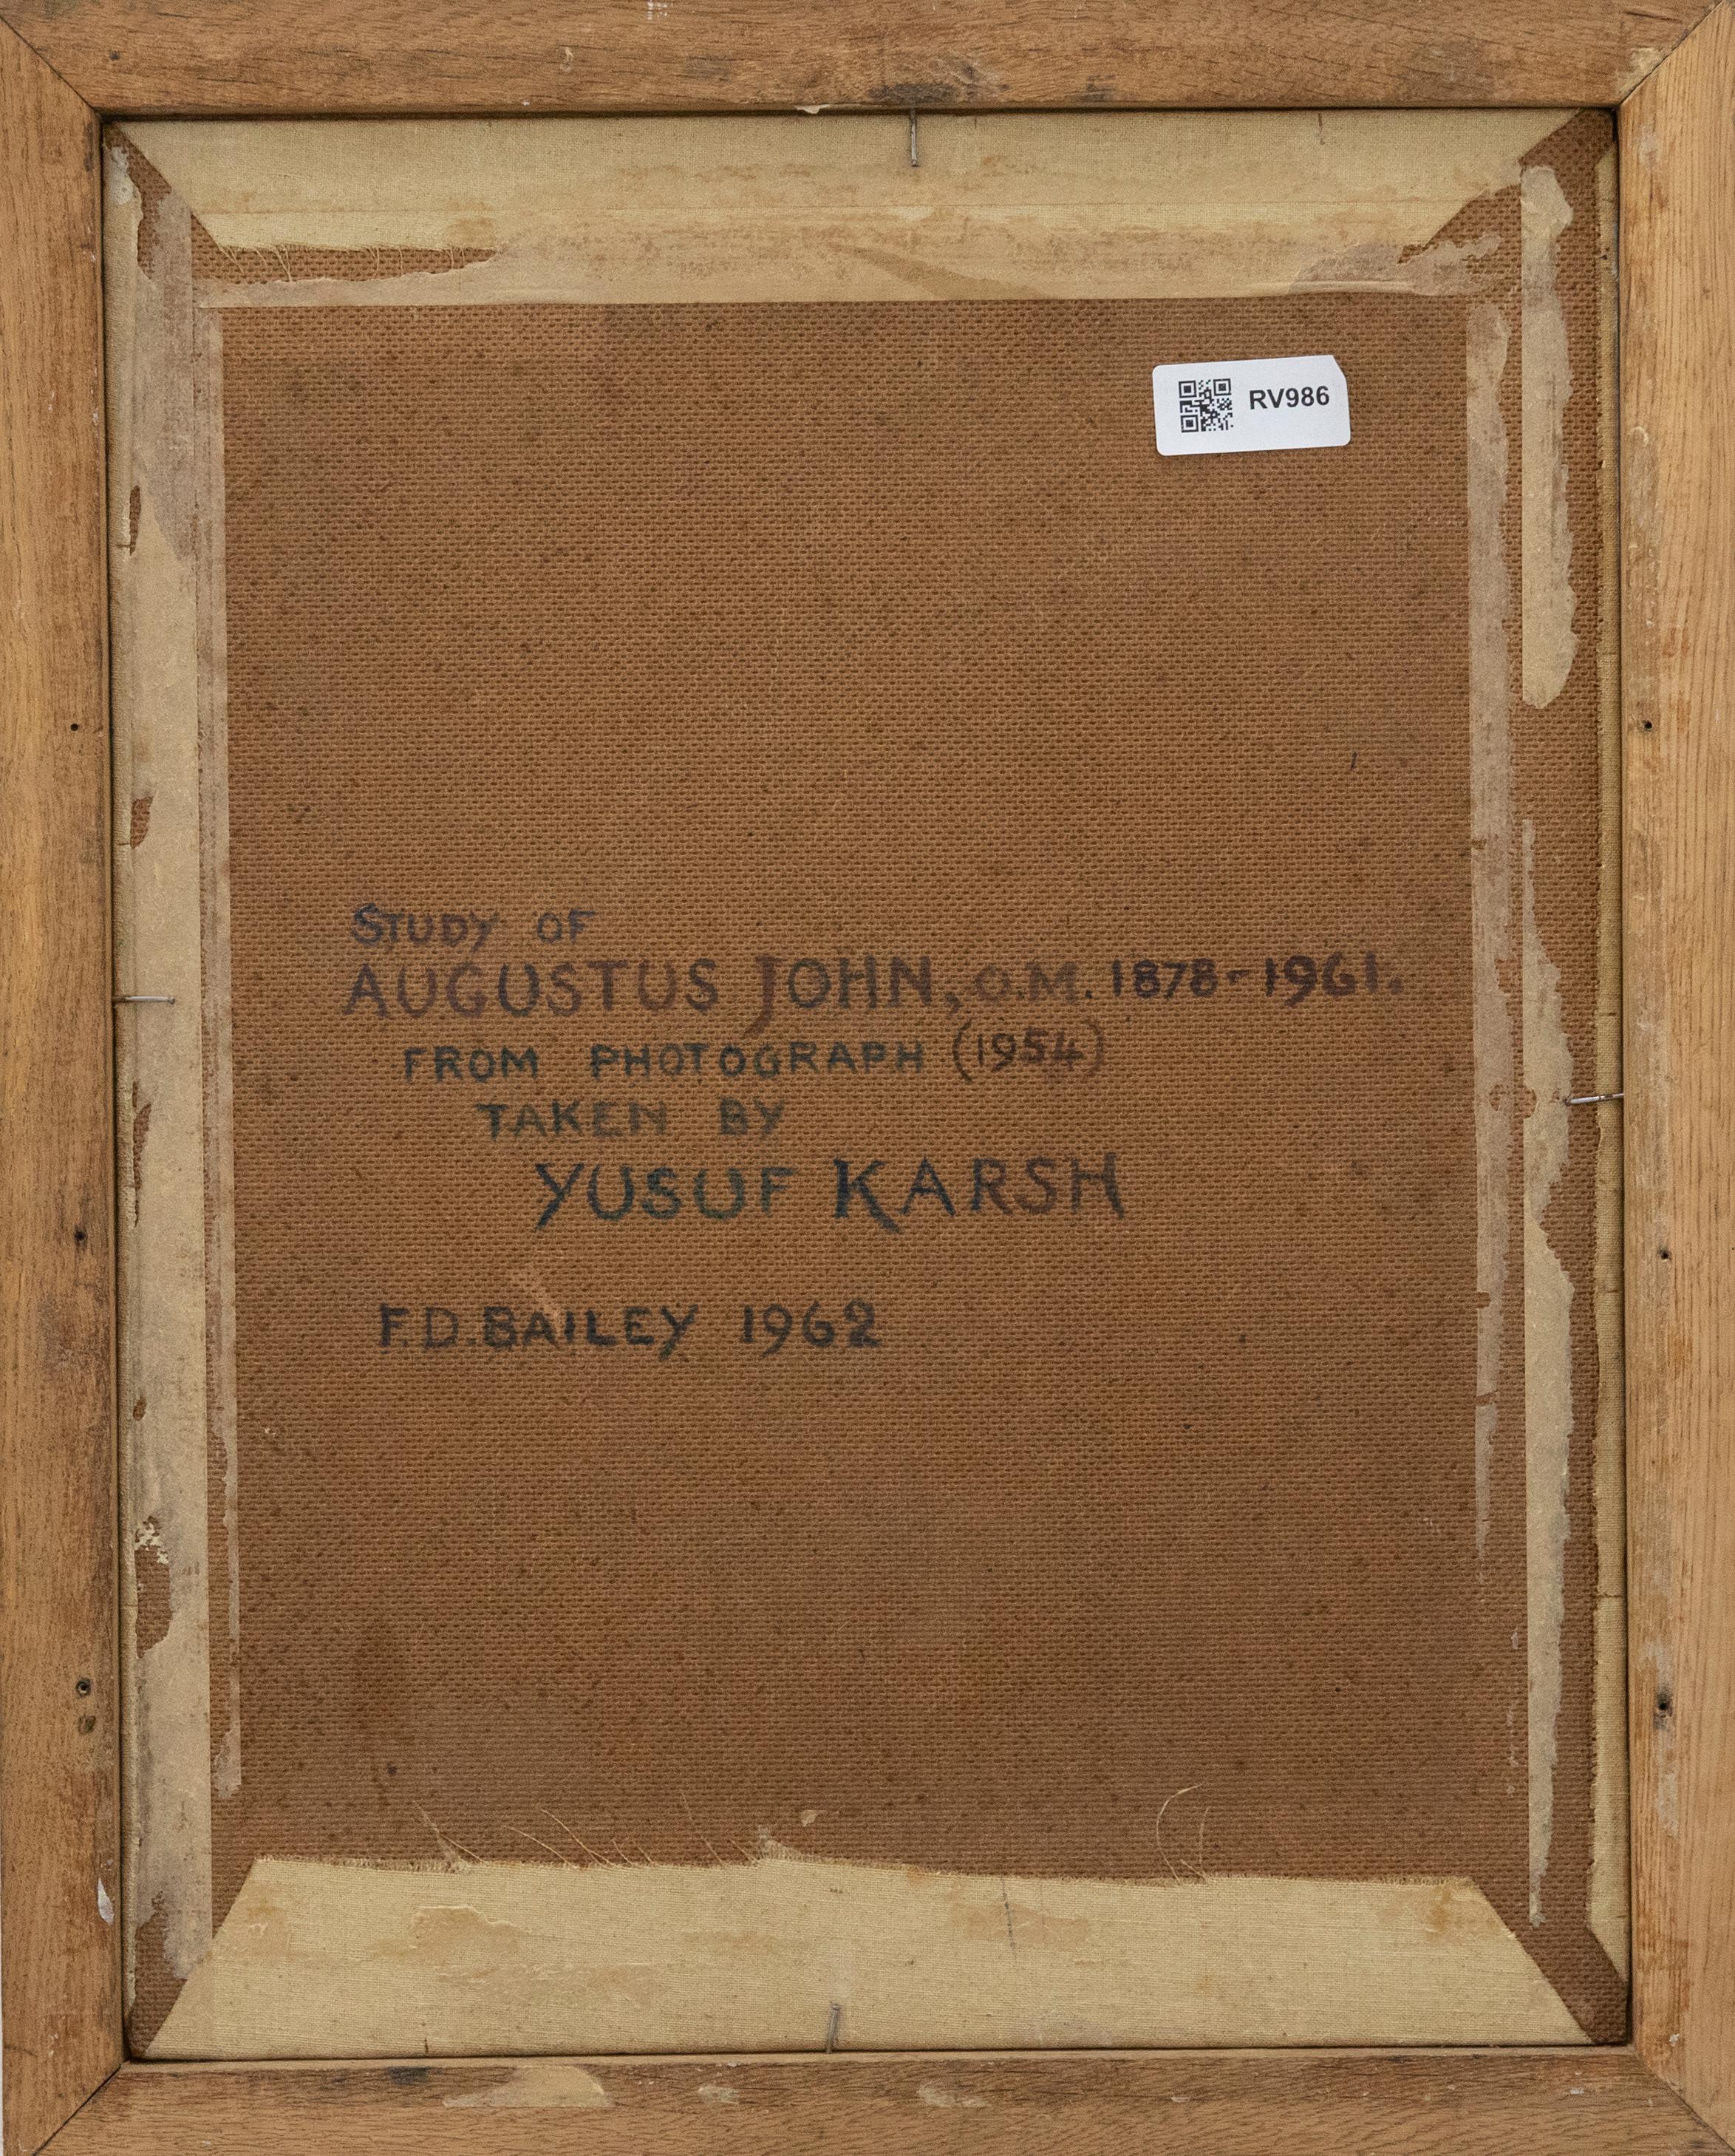 A 20th century portrait of Augustus John, O.M. (1878-1961), painted from a photograph taken by Yusuf Karsh in 1954. The profile has been well-presented in a fine oak frame. Signed to the lower left and dated 1962. With a full artist inscription